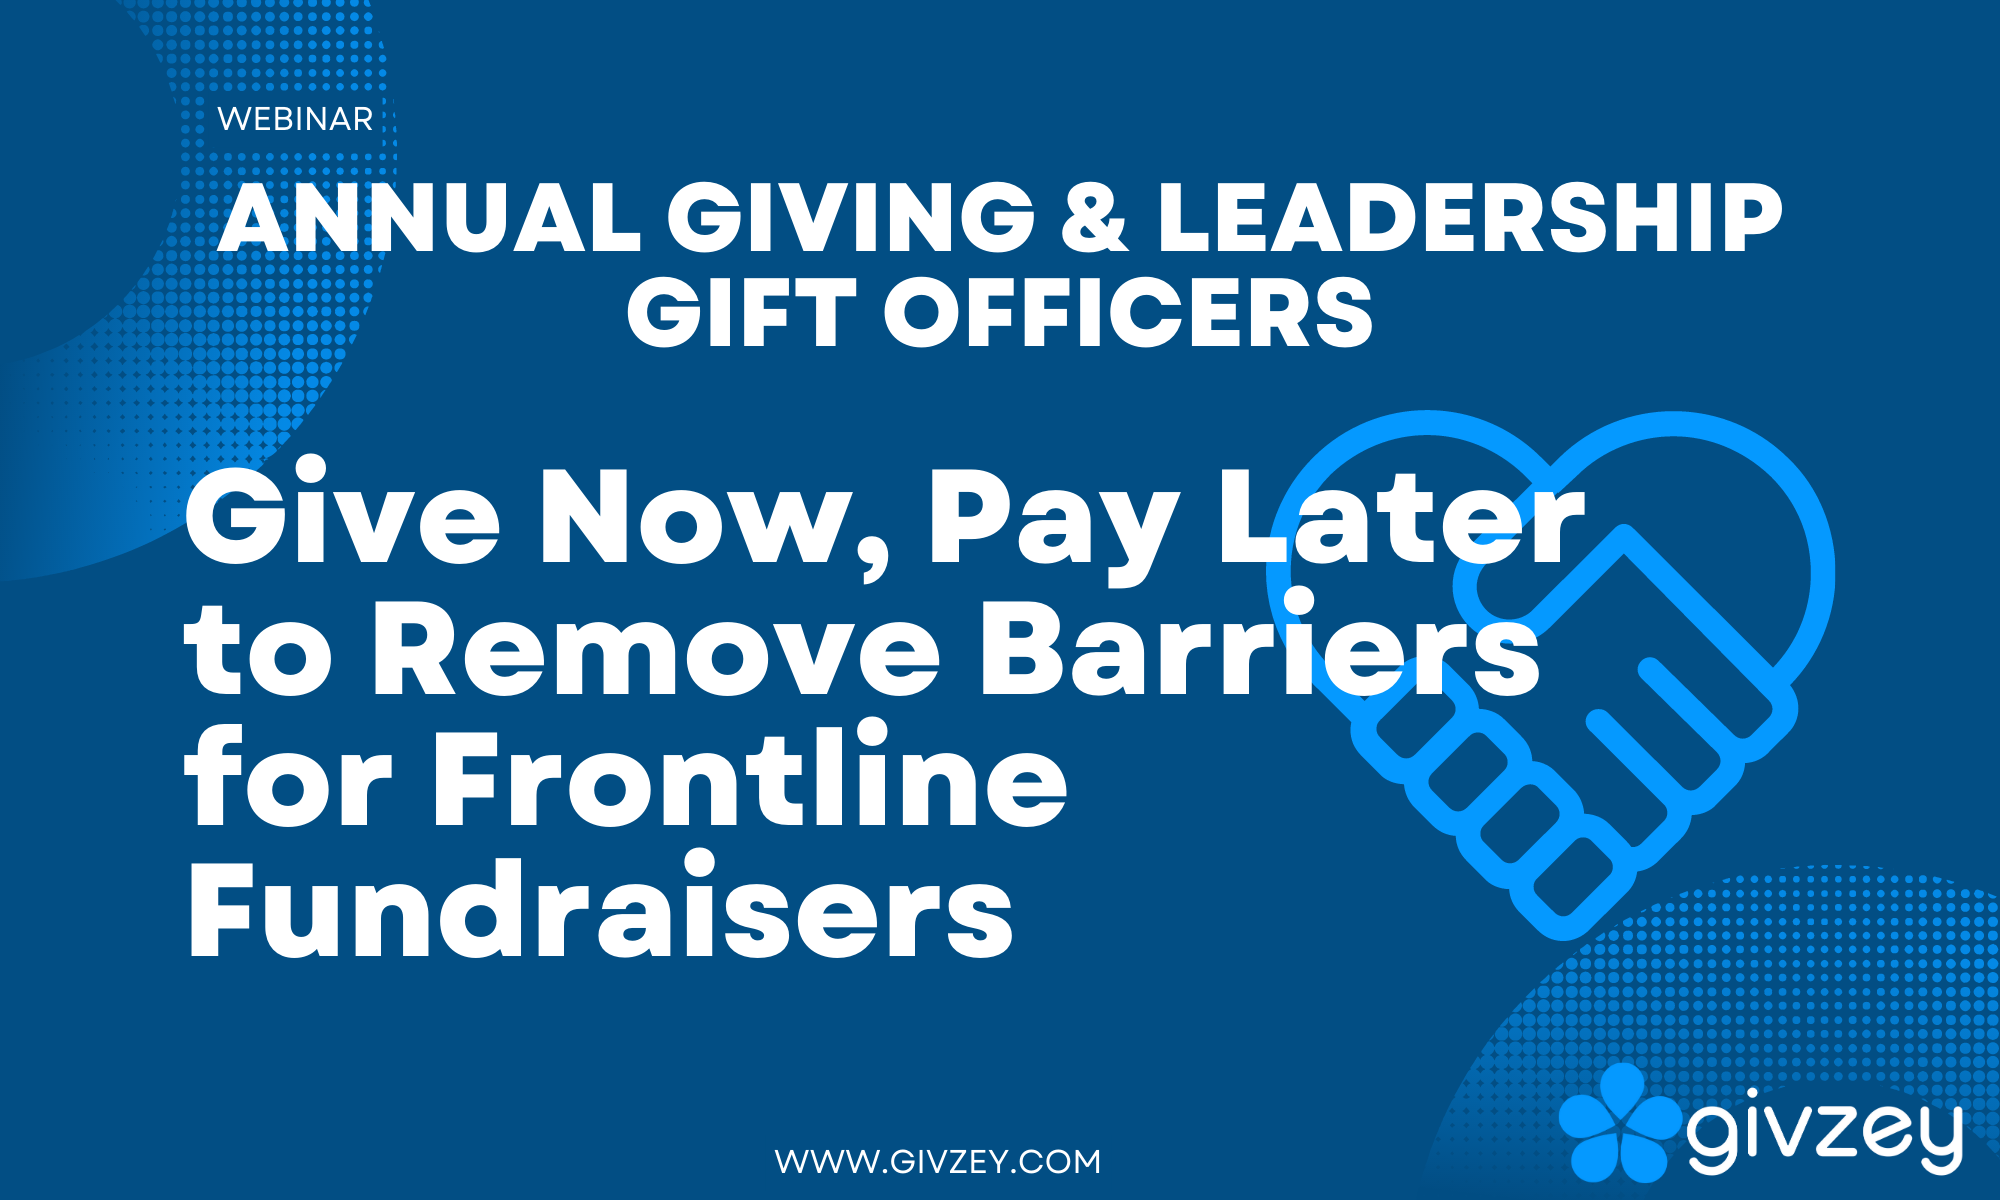 GNPL to Remove Barriers for Frontline Fundraisers